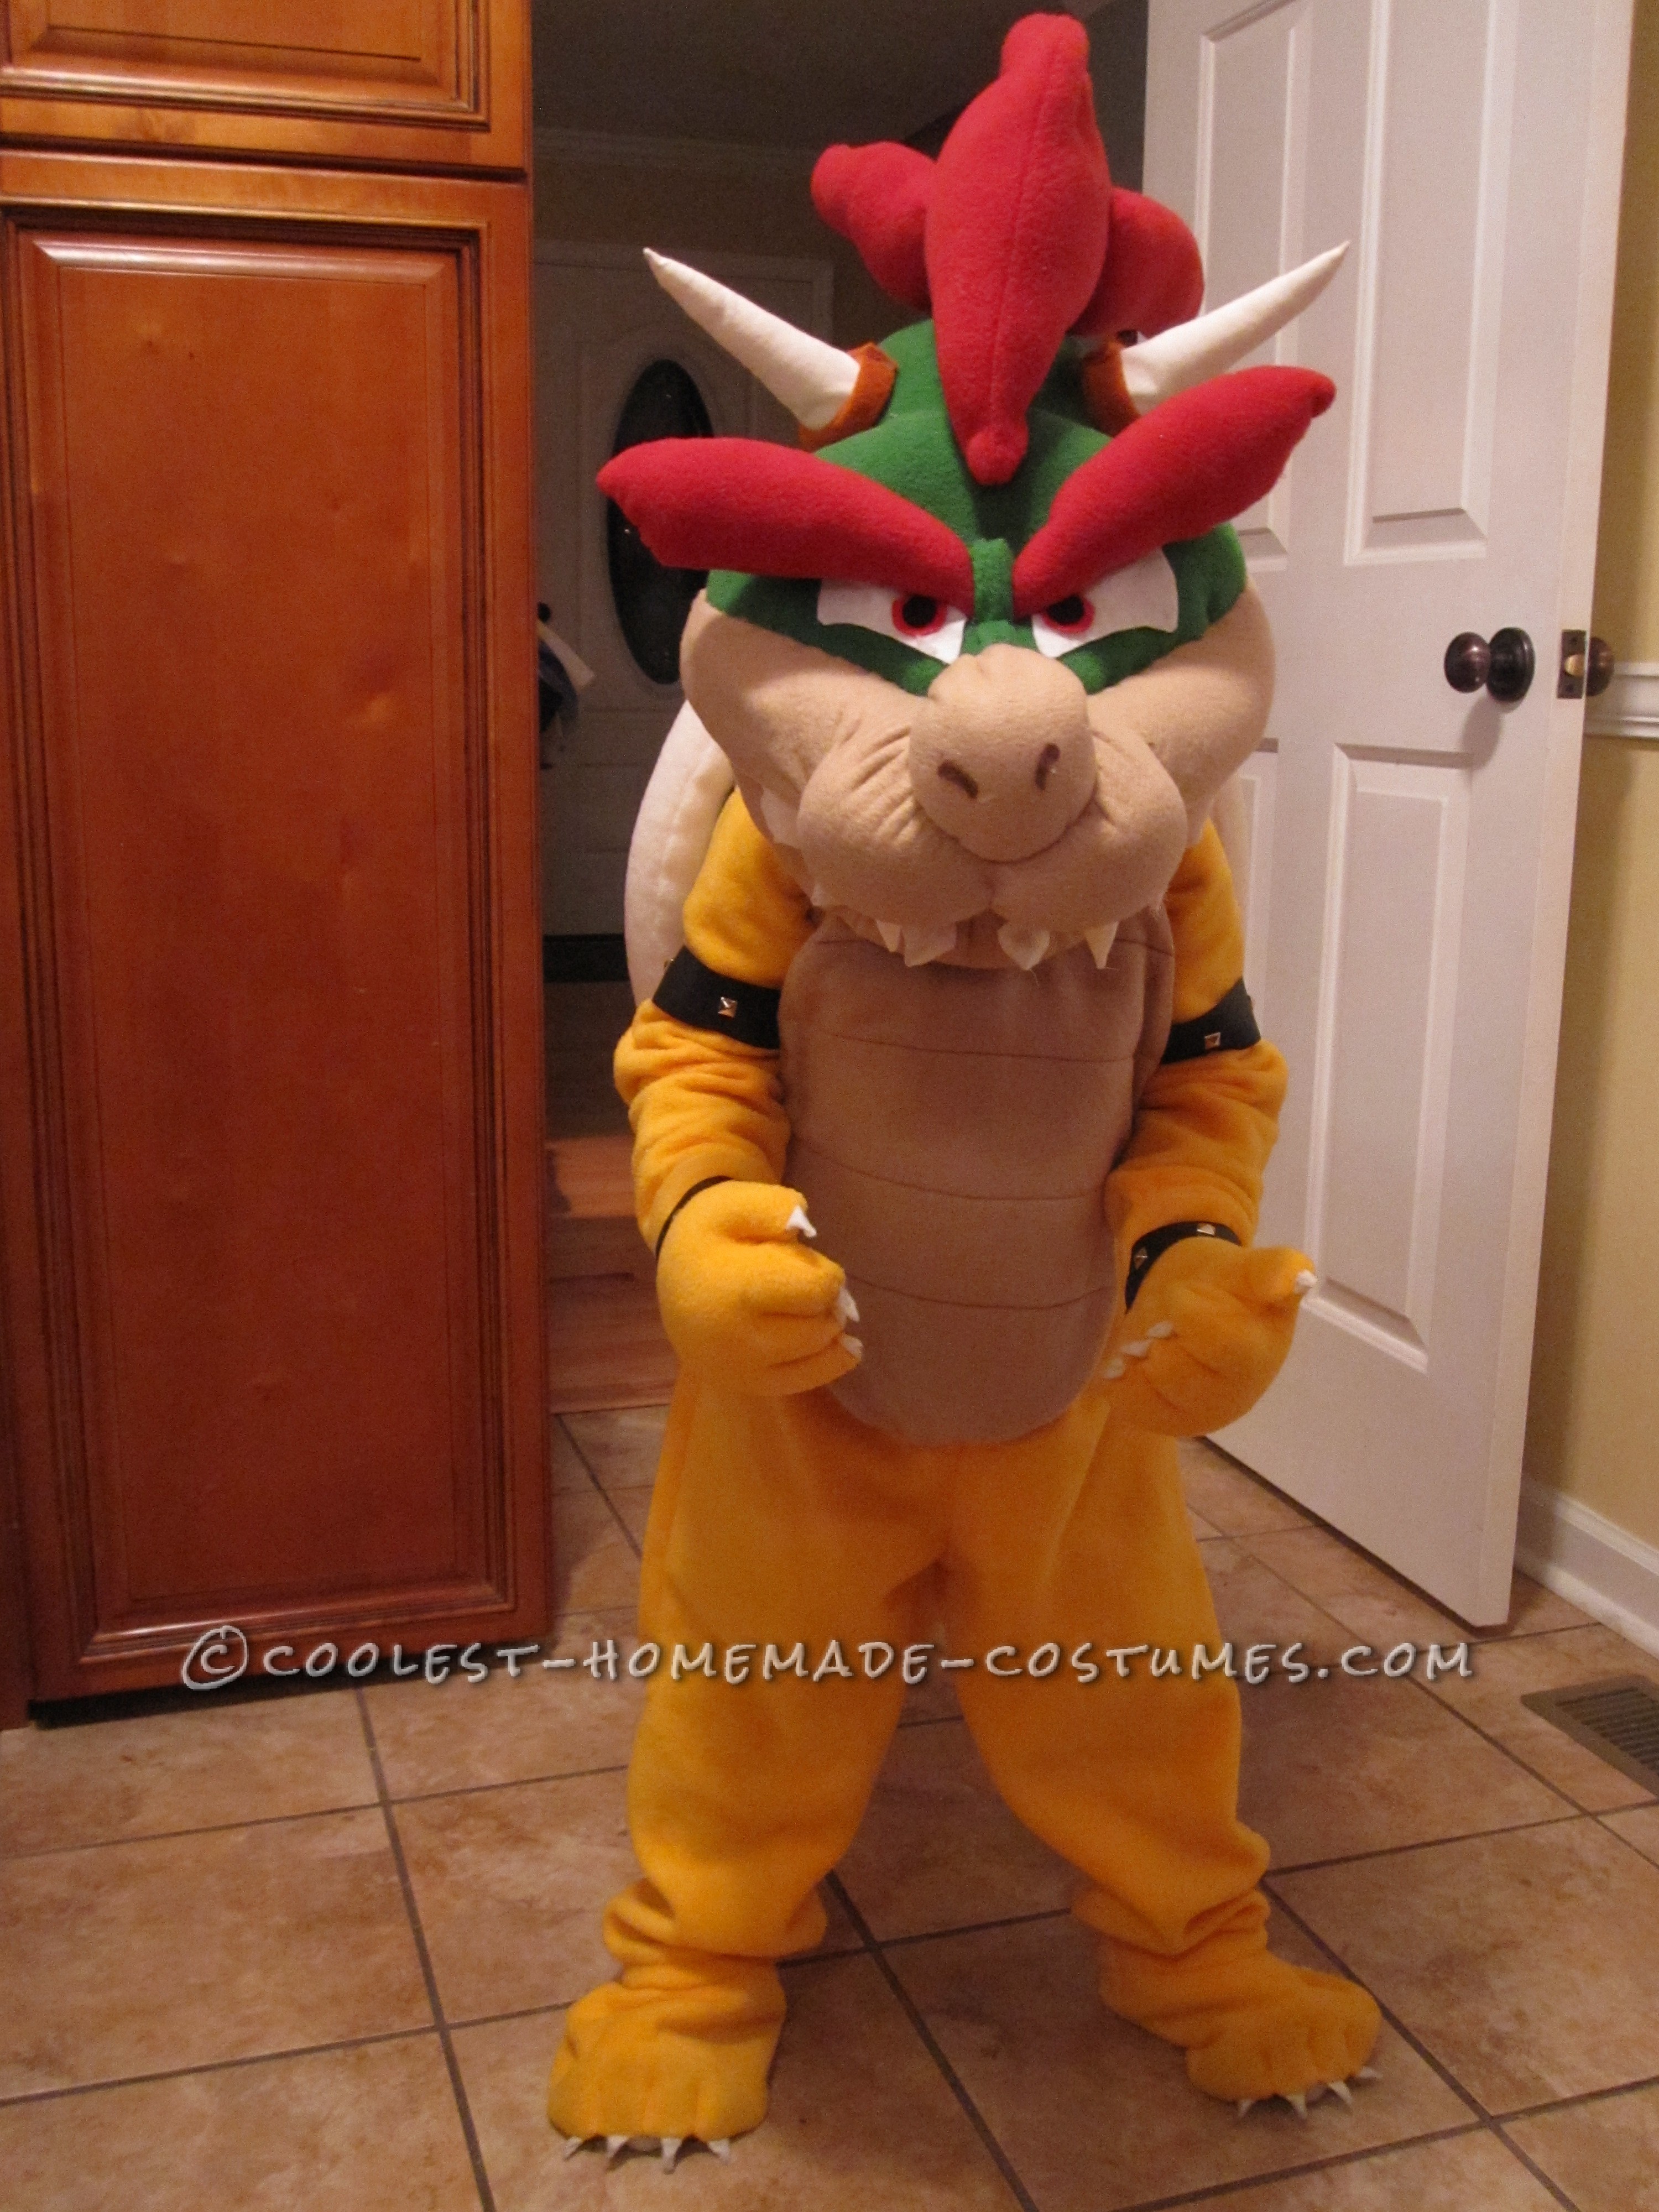 Lifelike Bowser Costume for 5 Year Old Boy